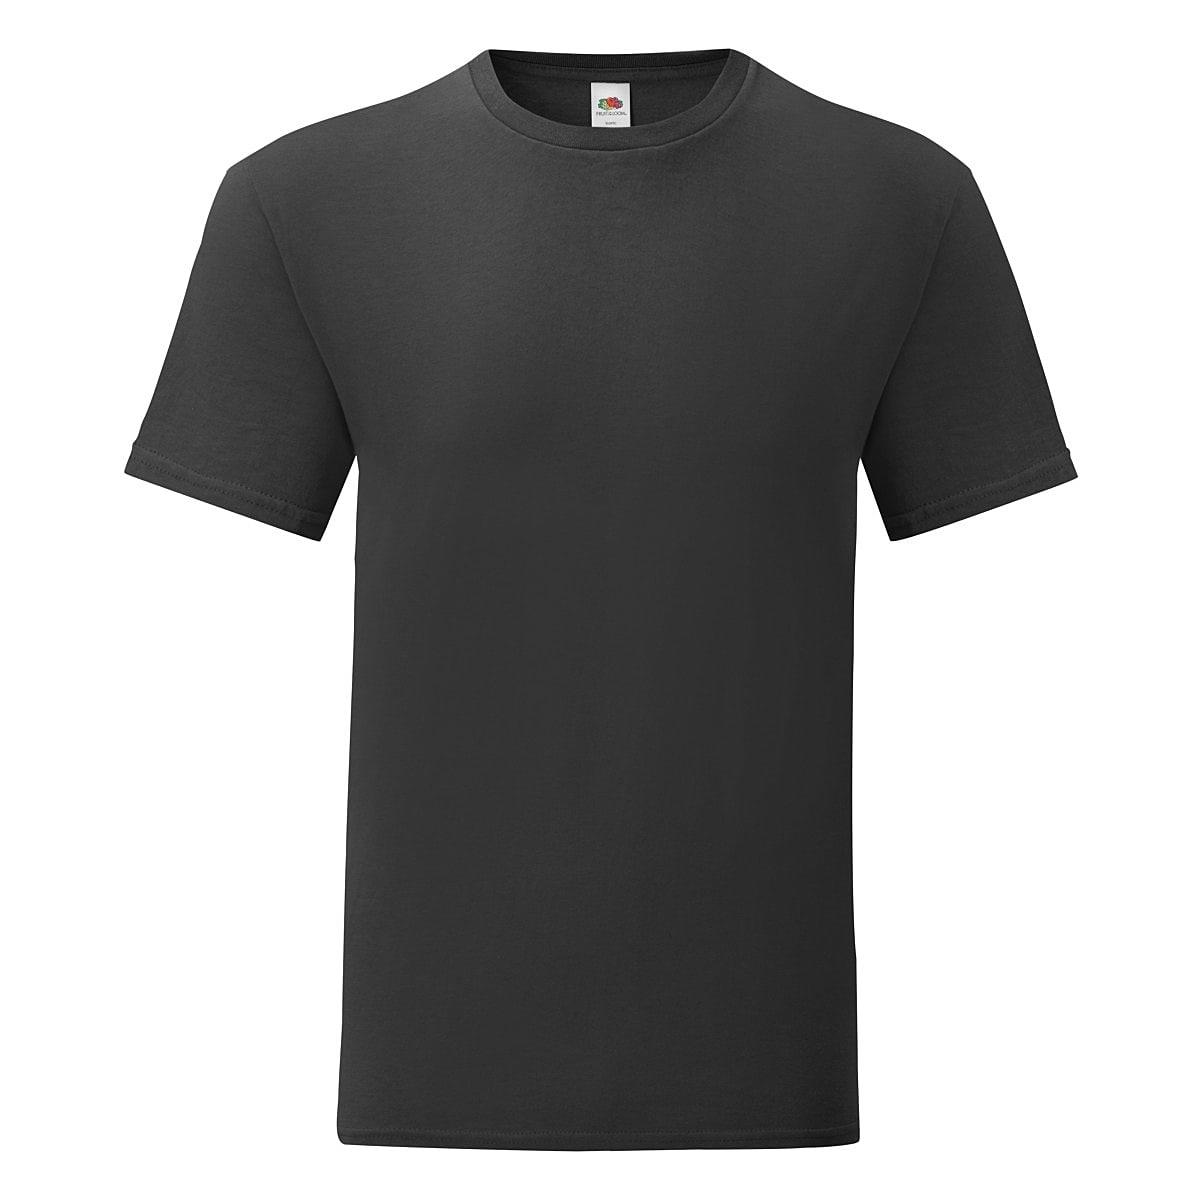 Fruit Of The Loom Mens Iconic T-Shirt in Black (Product Code: 61430)